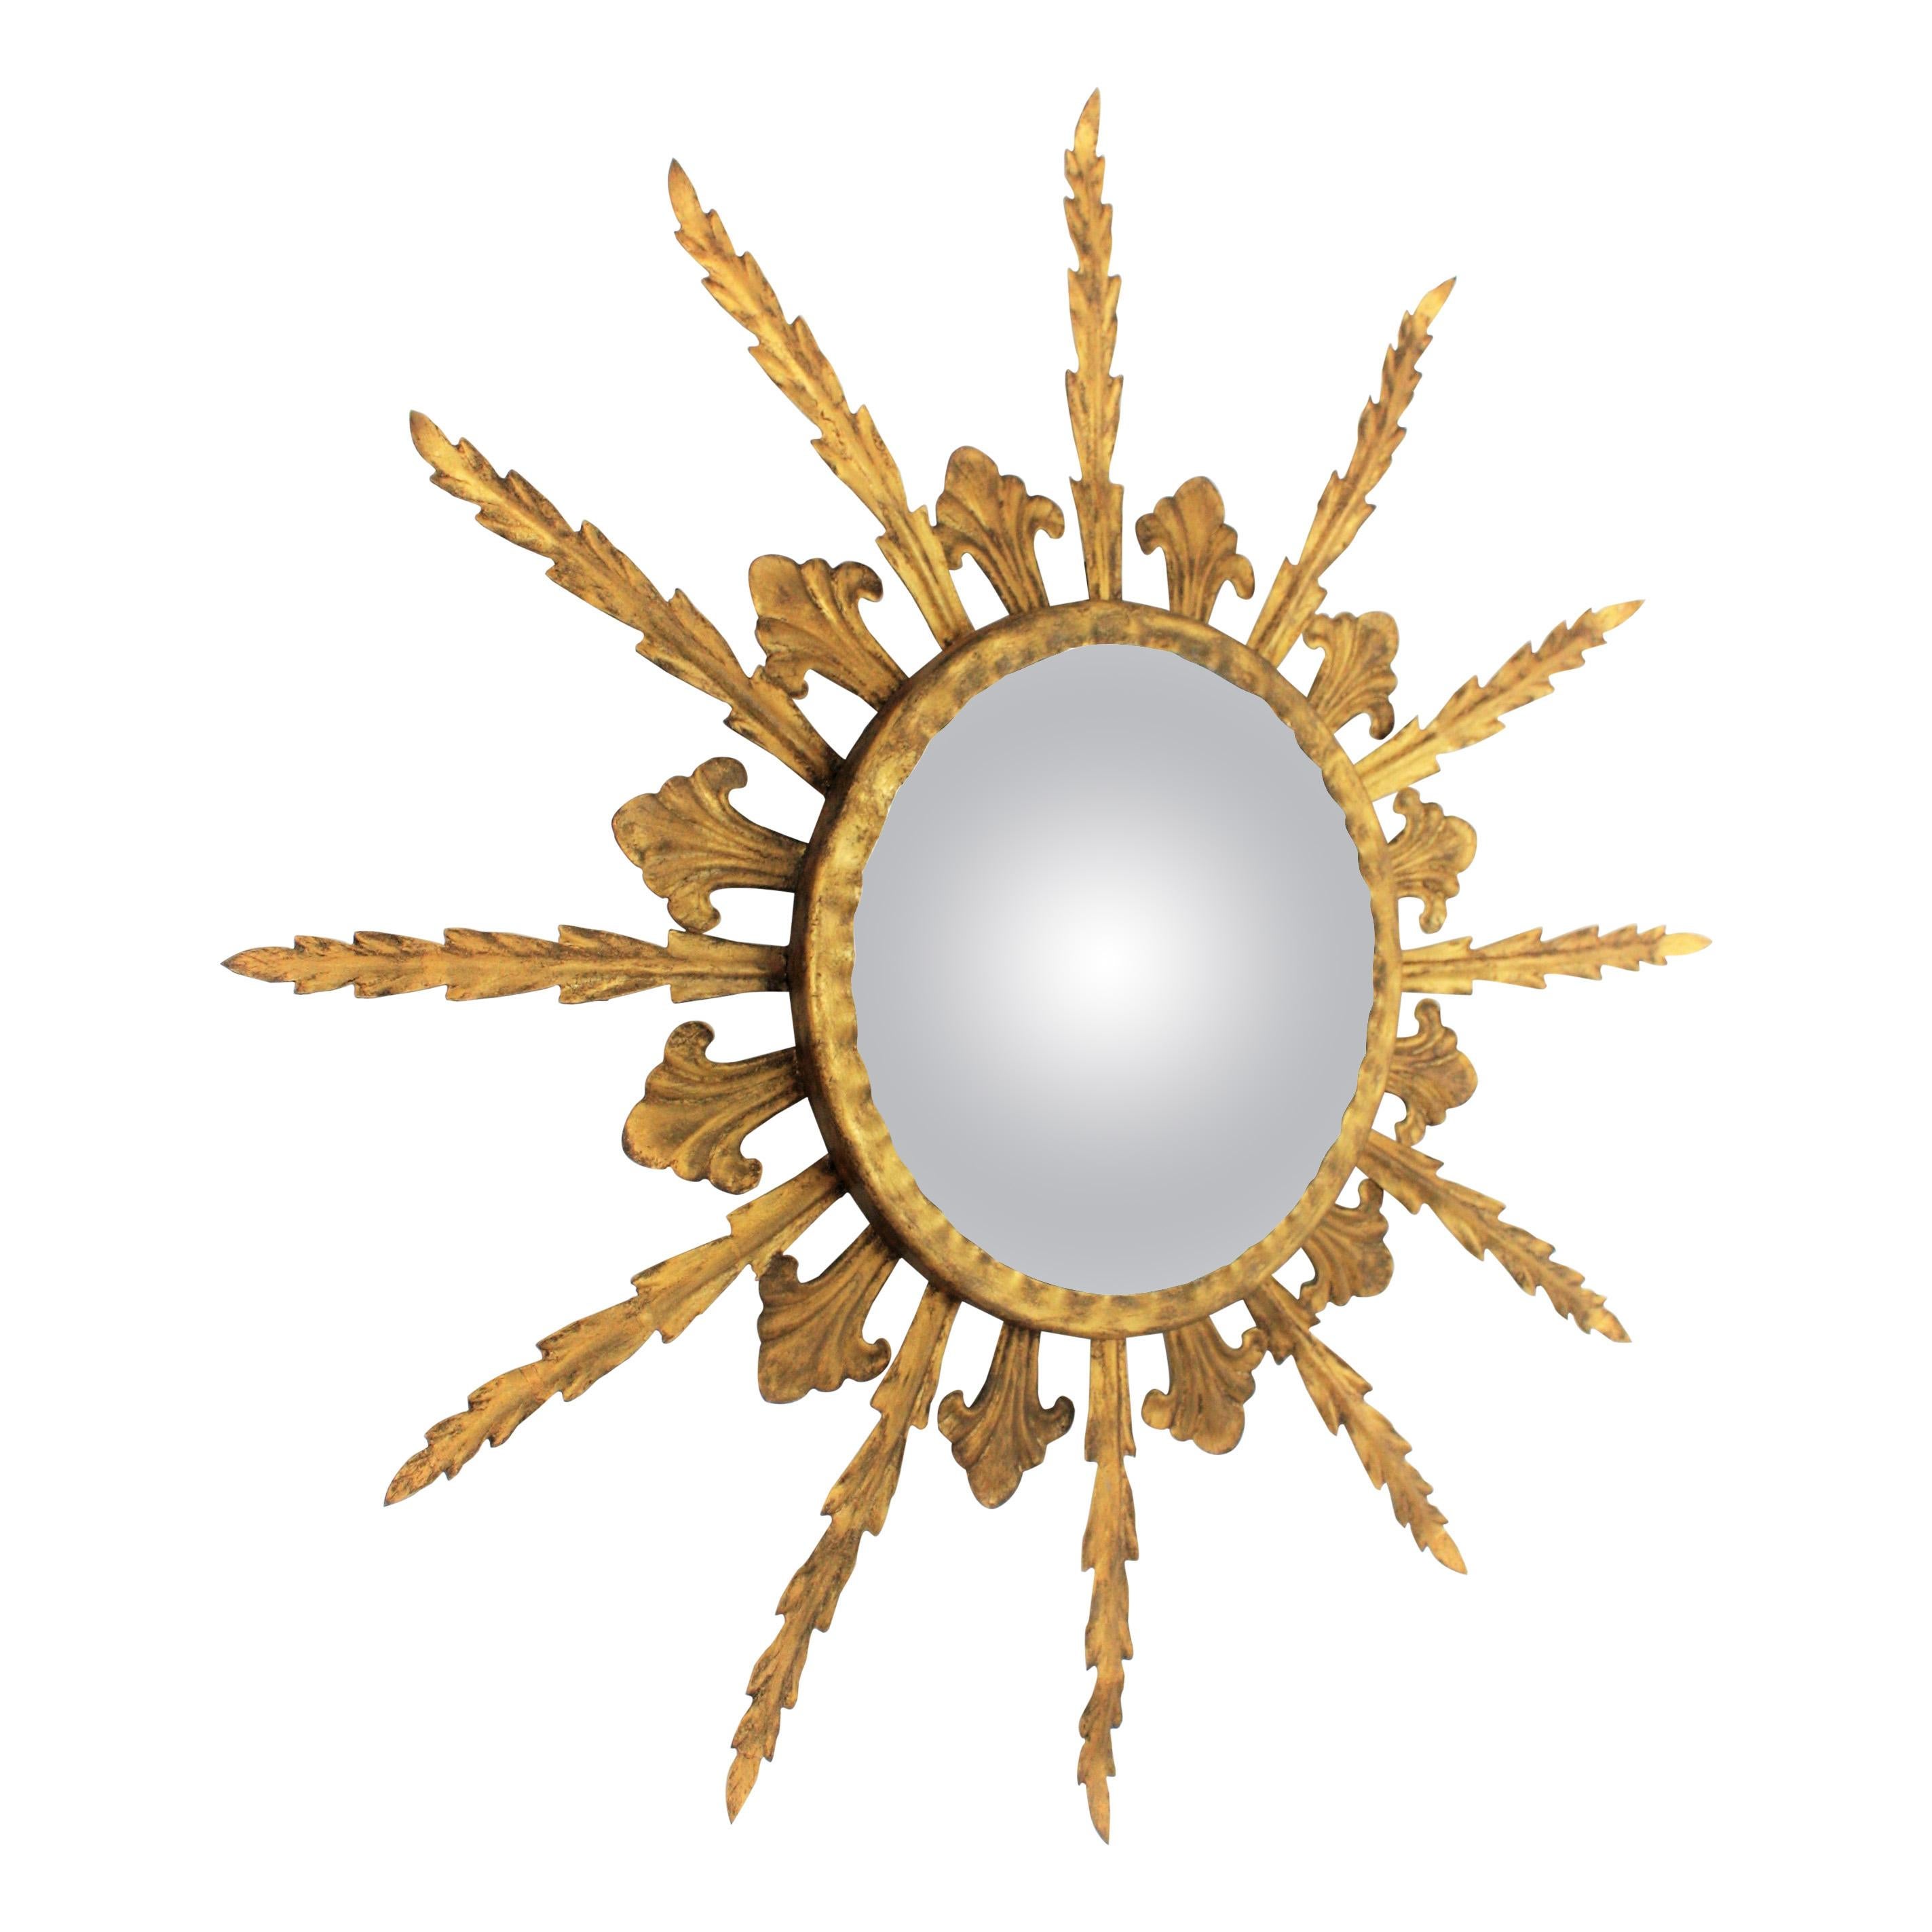 Hollywood Regency Sunburst Convex Mirror in Gilt Metal, France, 1950s
Eye-catching gilt iron Hollywood Regency convex sunburst mirror with leafed frame and gold leaf finish. France, 1950s.
This mirror has a beautiful aged patina and it is